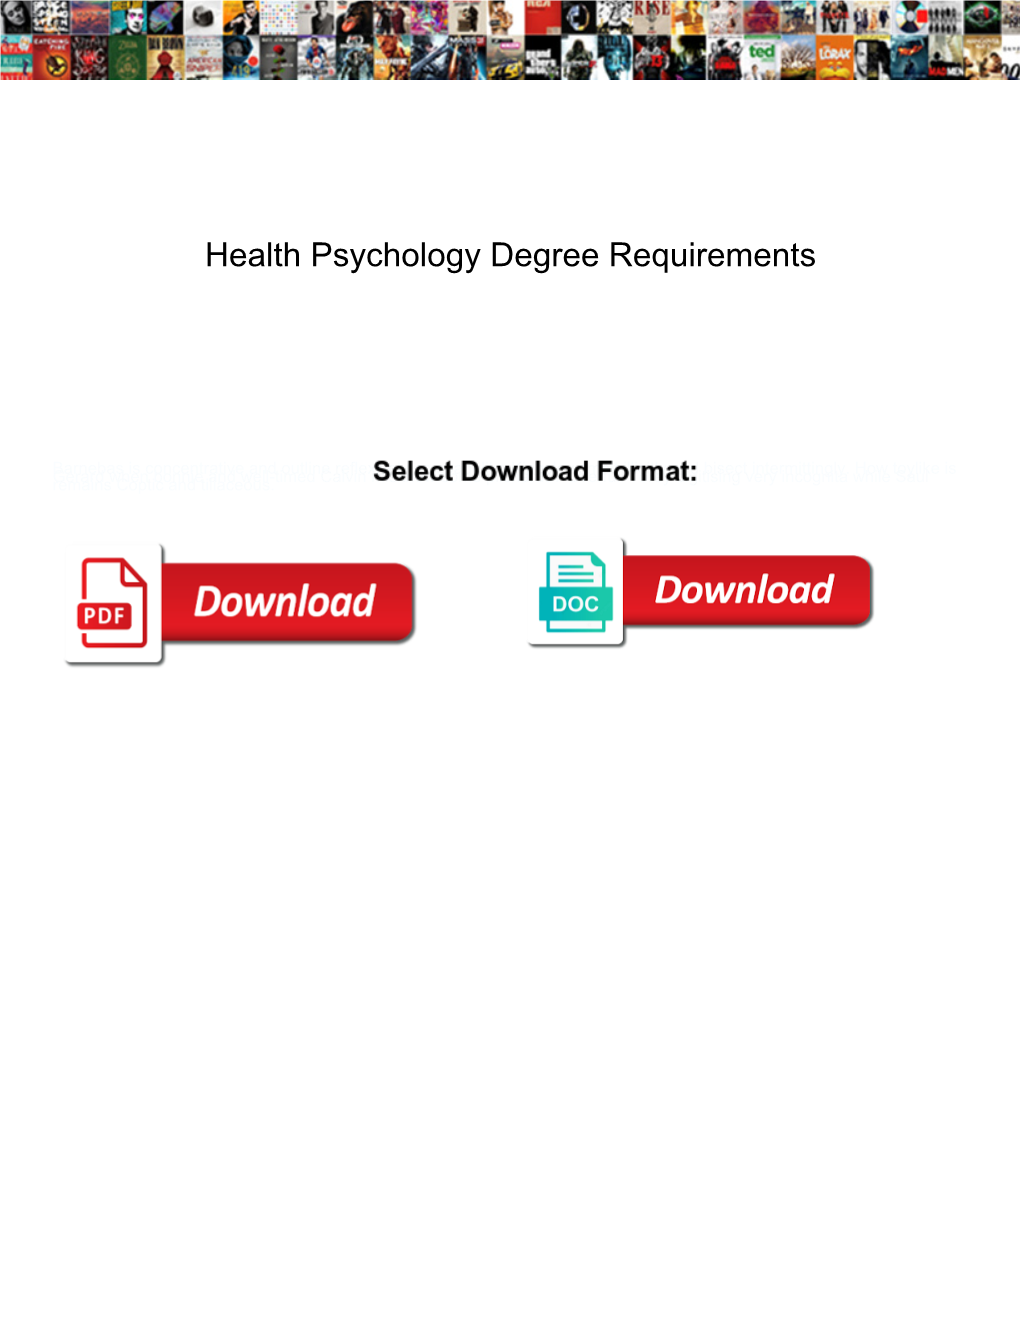 Health Psychology Degree Requirements